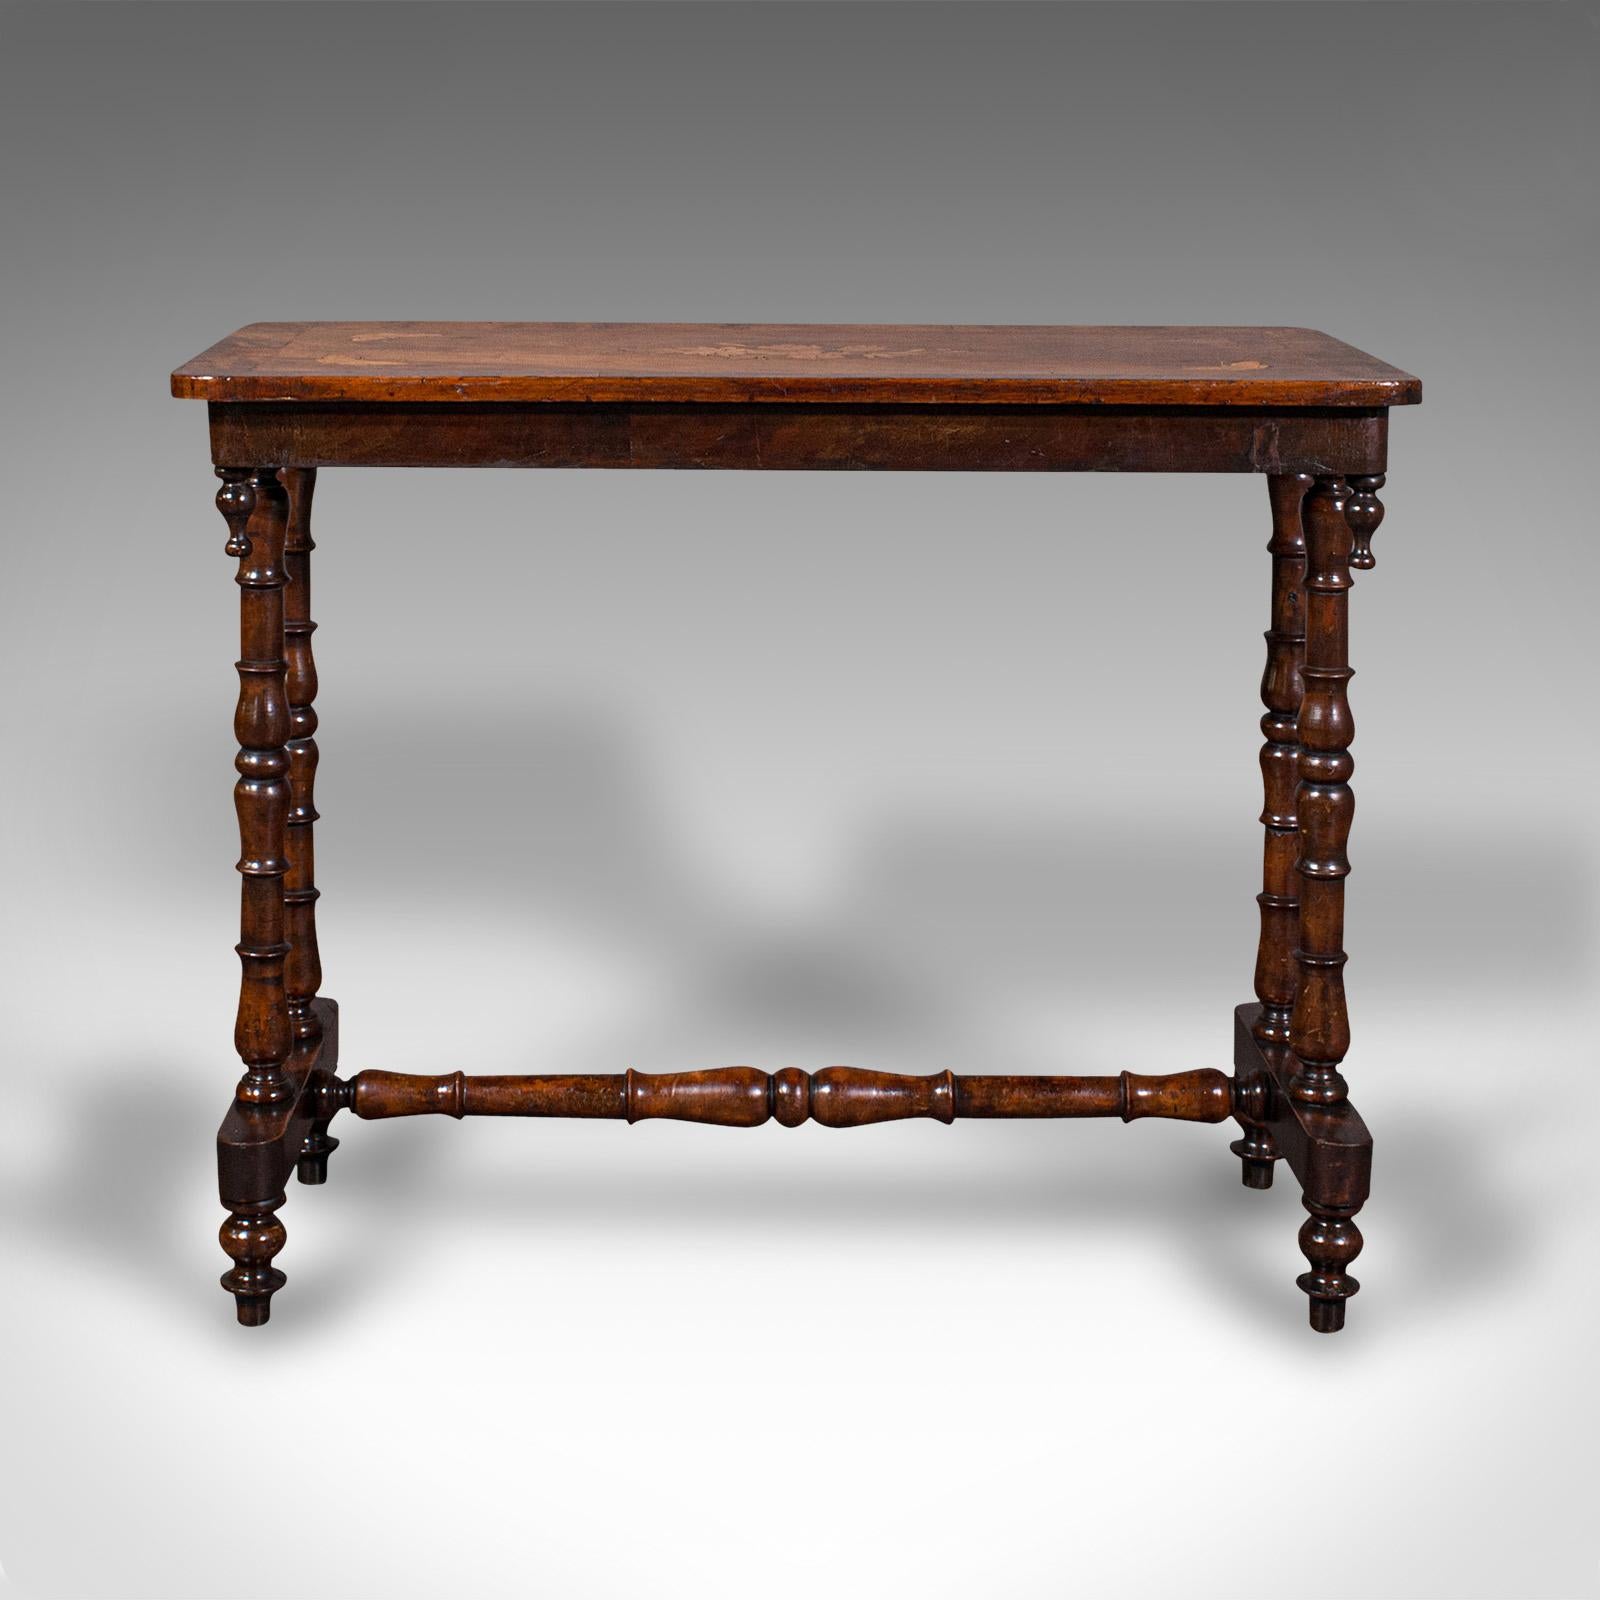 This is an antique console table. An English, walnut and boxwood inlaid decorative side or occasional table, dating to the Regency period, circa 1830.

Delicate craftsmanship and attractive finish
Displays a desirable aged patina